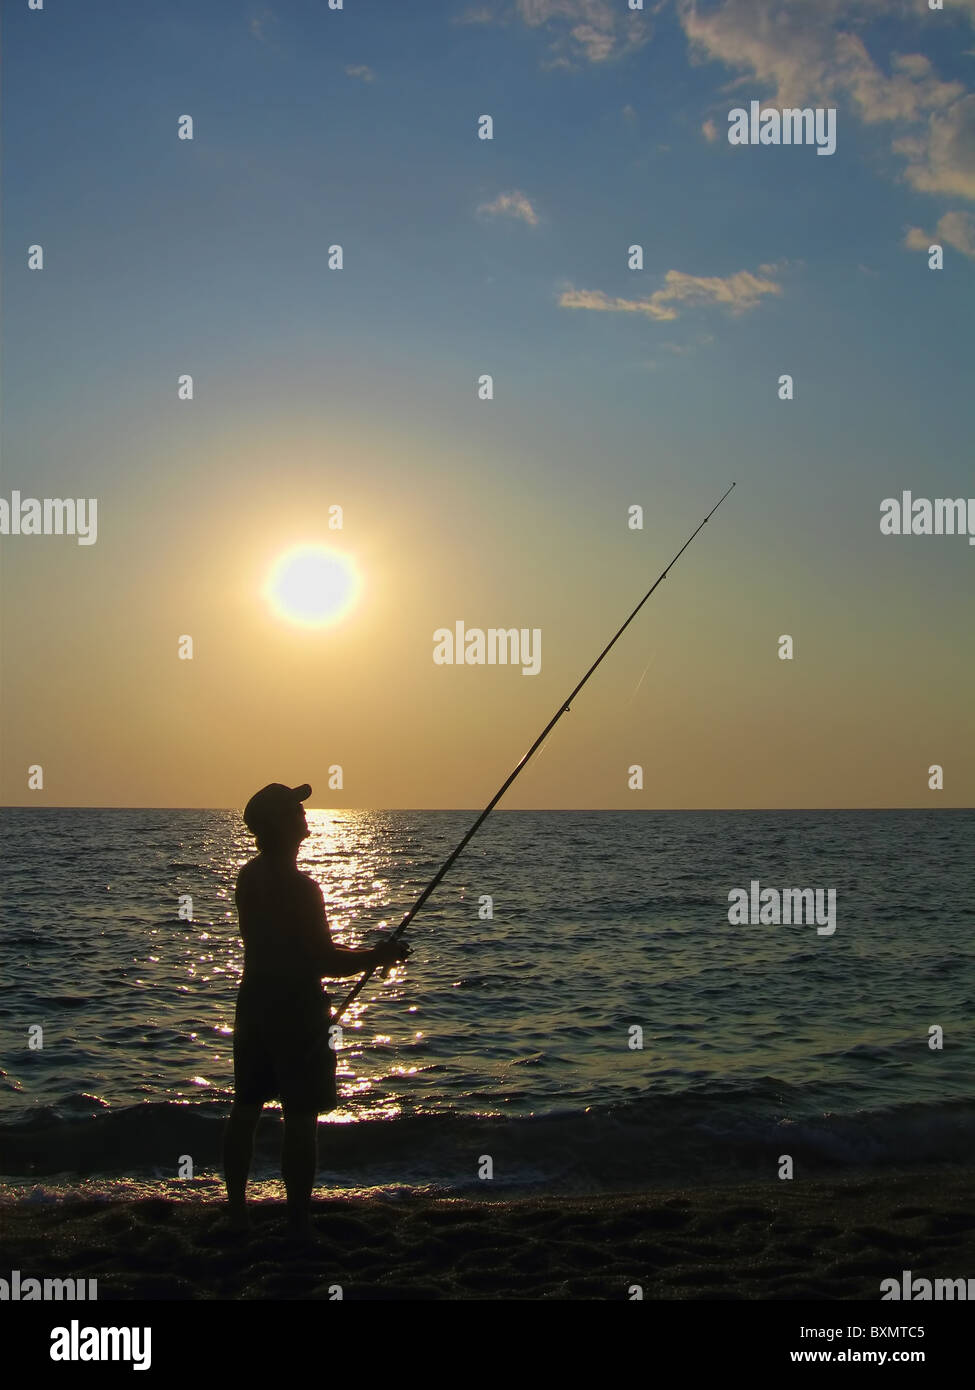 The silhouette of a fisherman on the beach at sunset Stock Photo